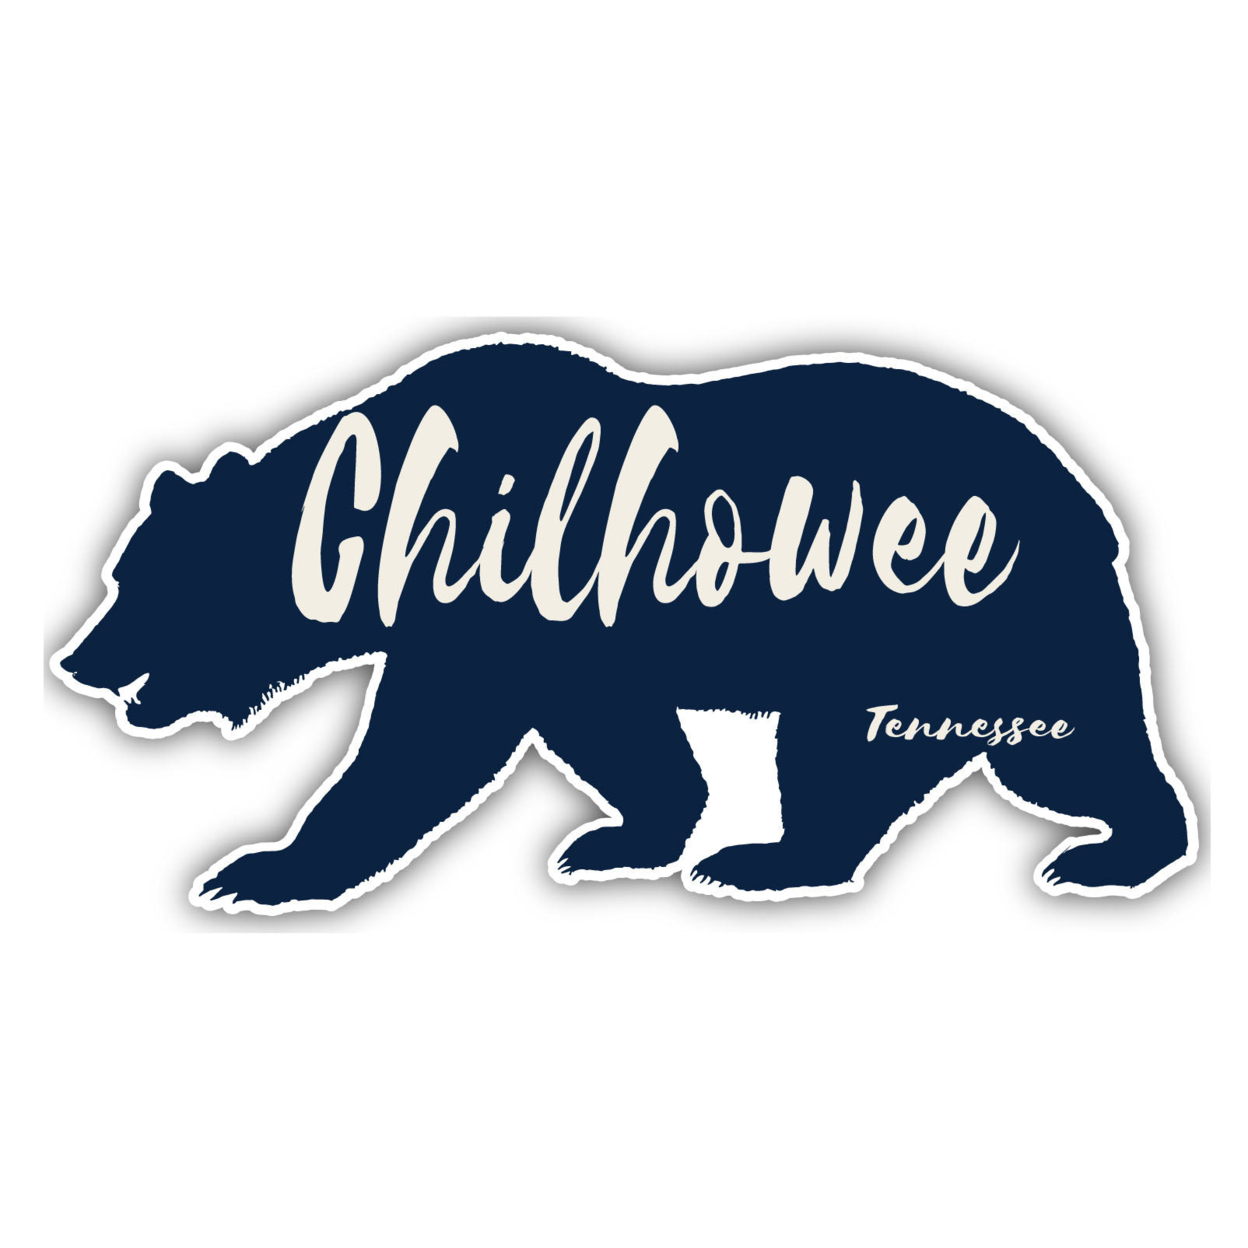 Chilhowee Tennessee Souvenir Decorative Stickers (Choose Theme And Size) - 4-Pack, 10-Inch, Bear